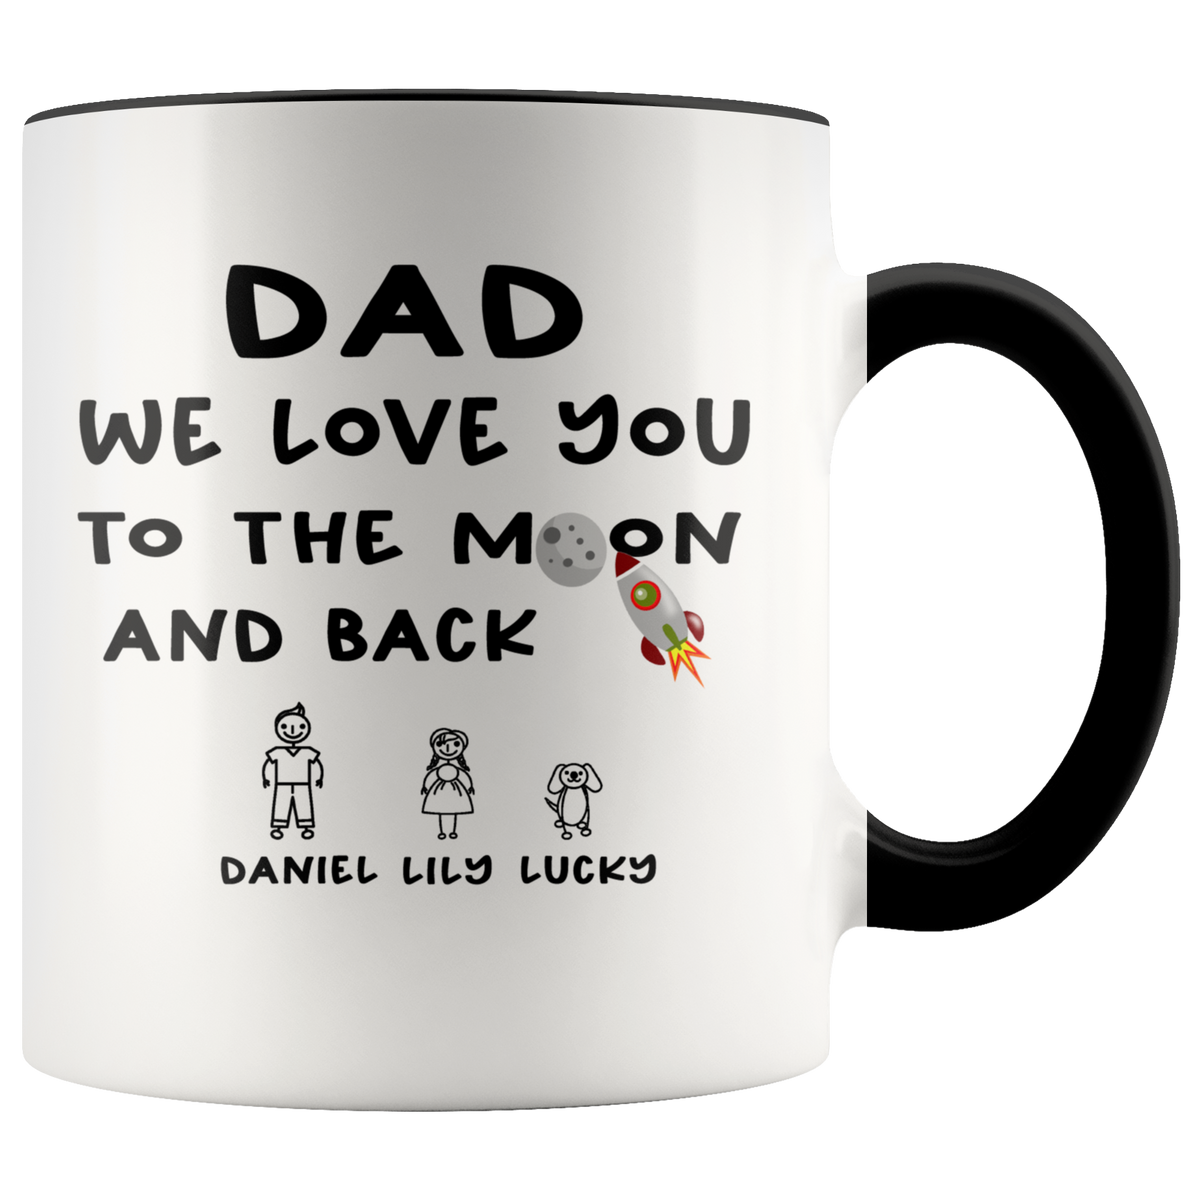 Personalized Dad Mug - We Love You To The Moon And Back Accent Coffee Mug 11oz